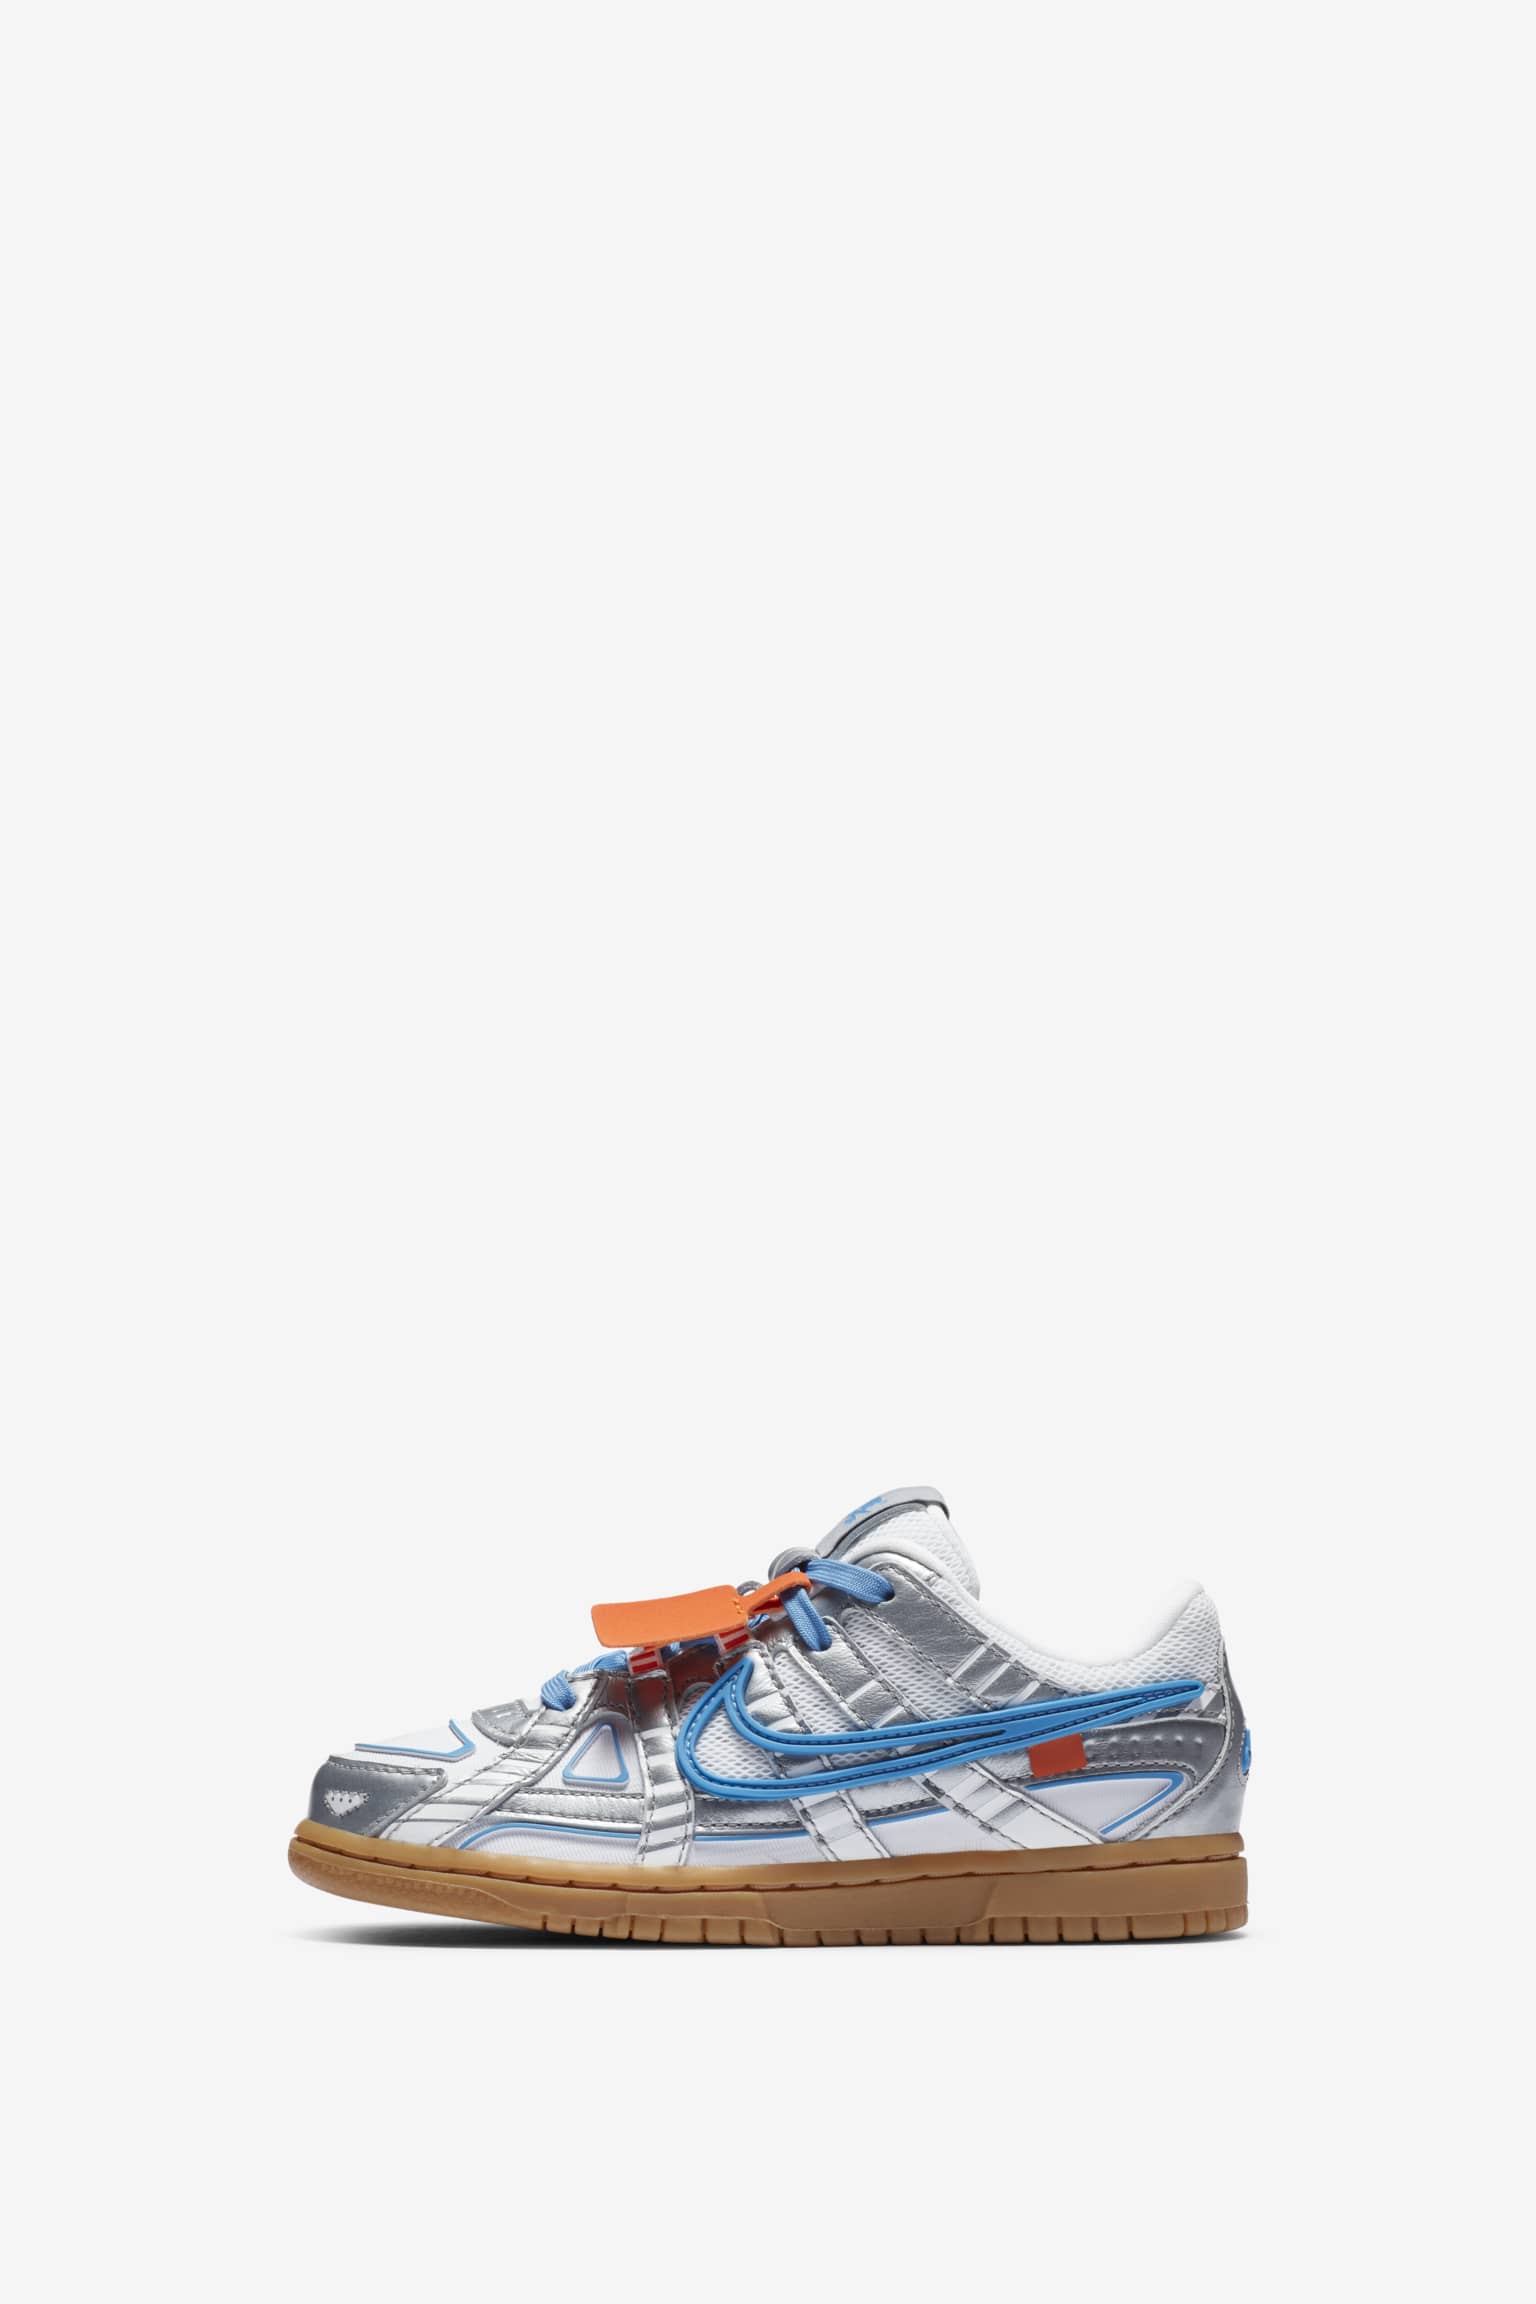 off white nike shoes kids